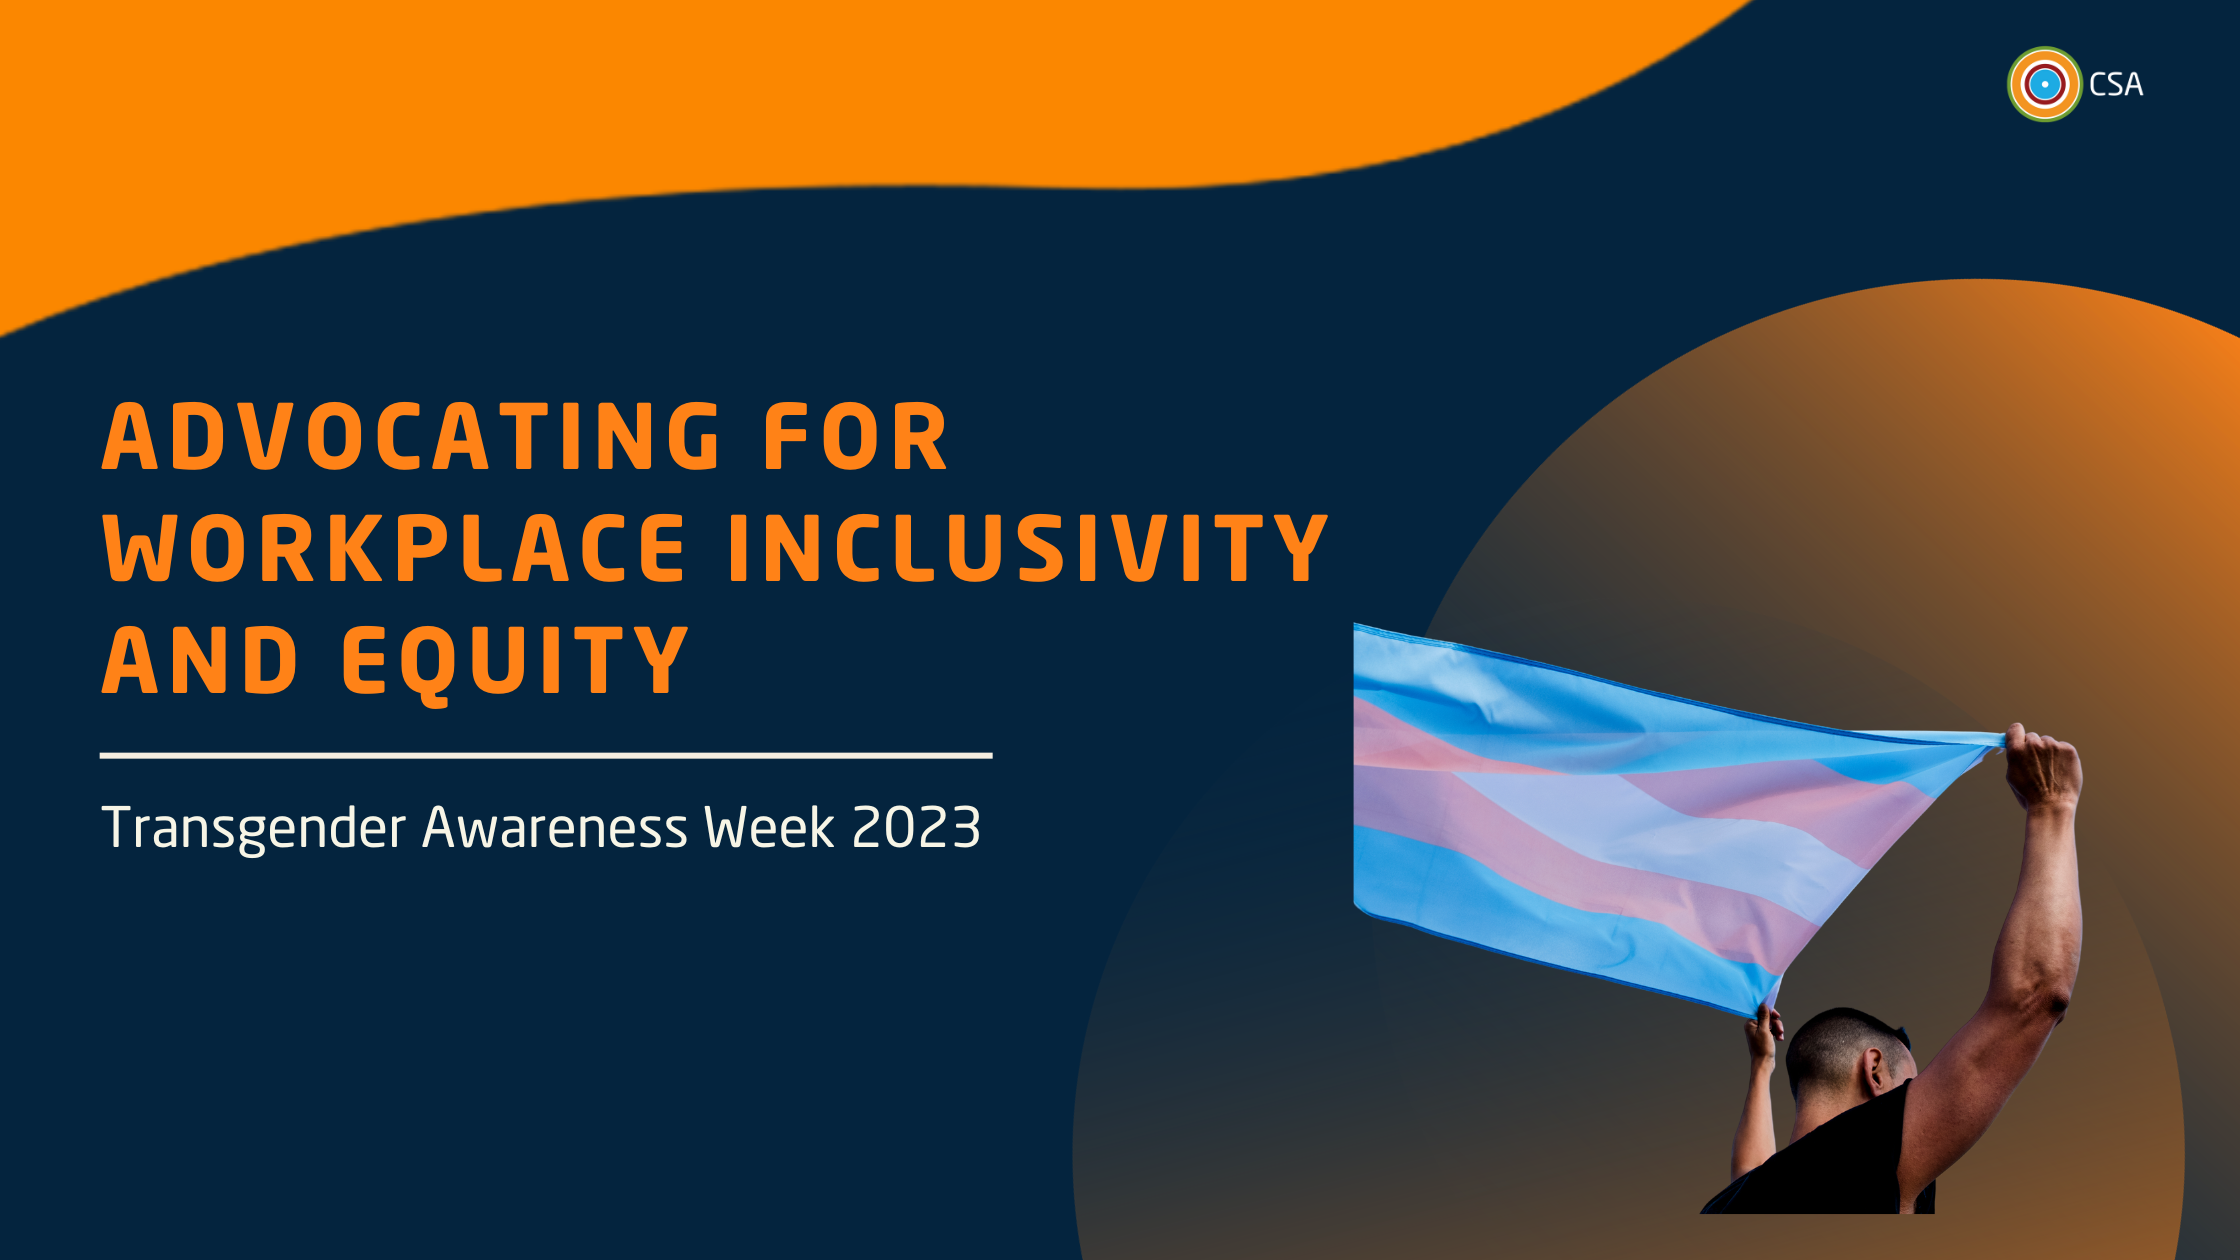 Transgender Awareness Week: Advocating for Workplace Inclusivity and Equity